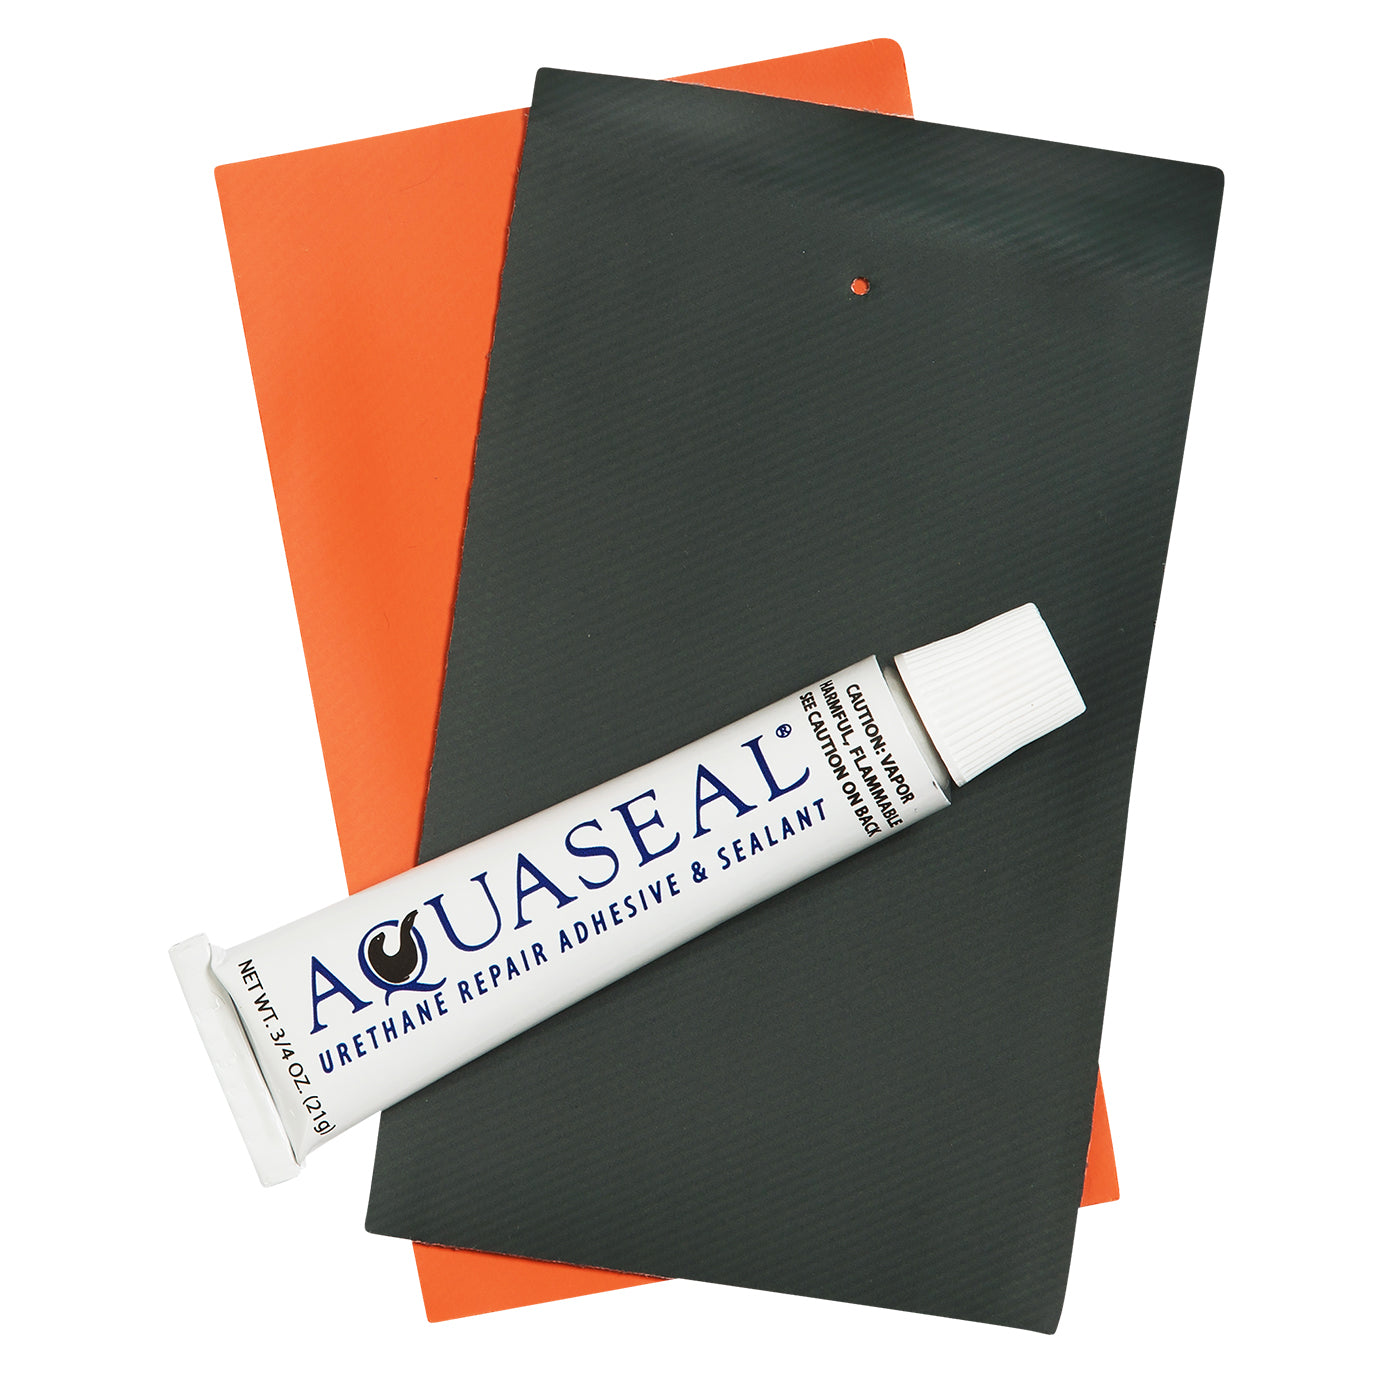 Patch Seal Adhesive Sheets